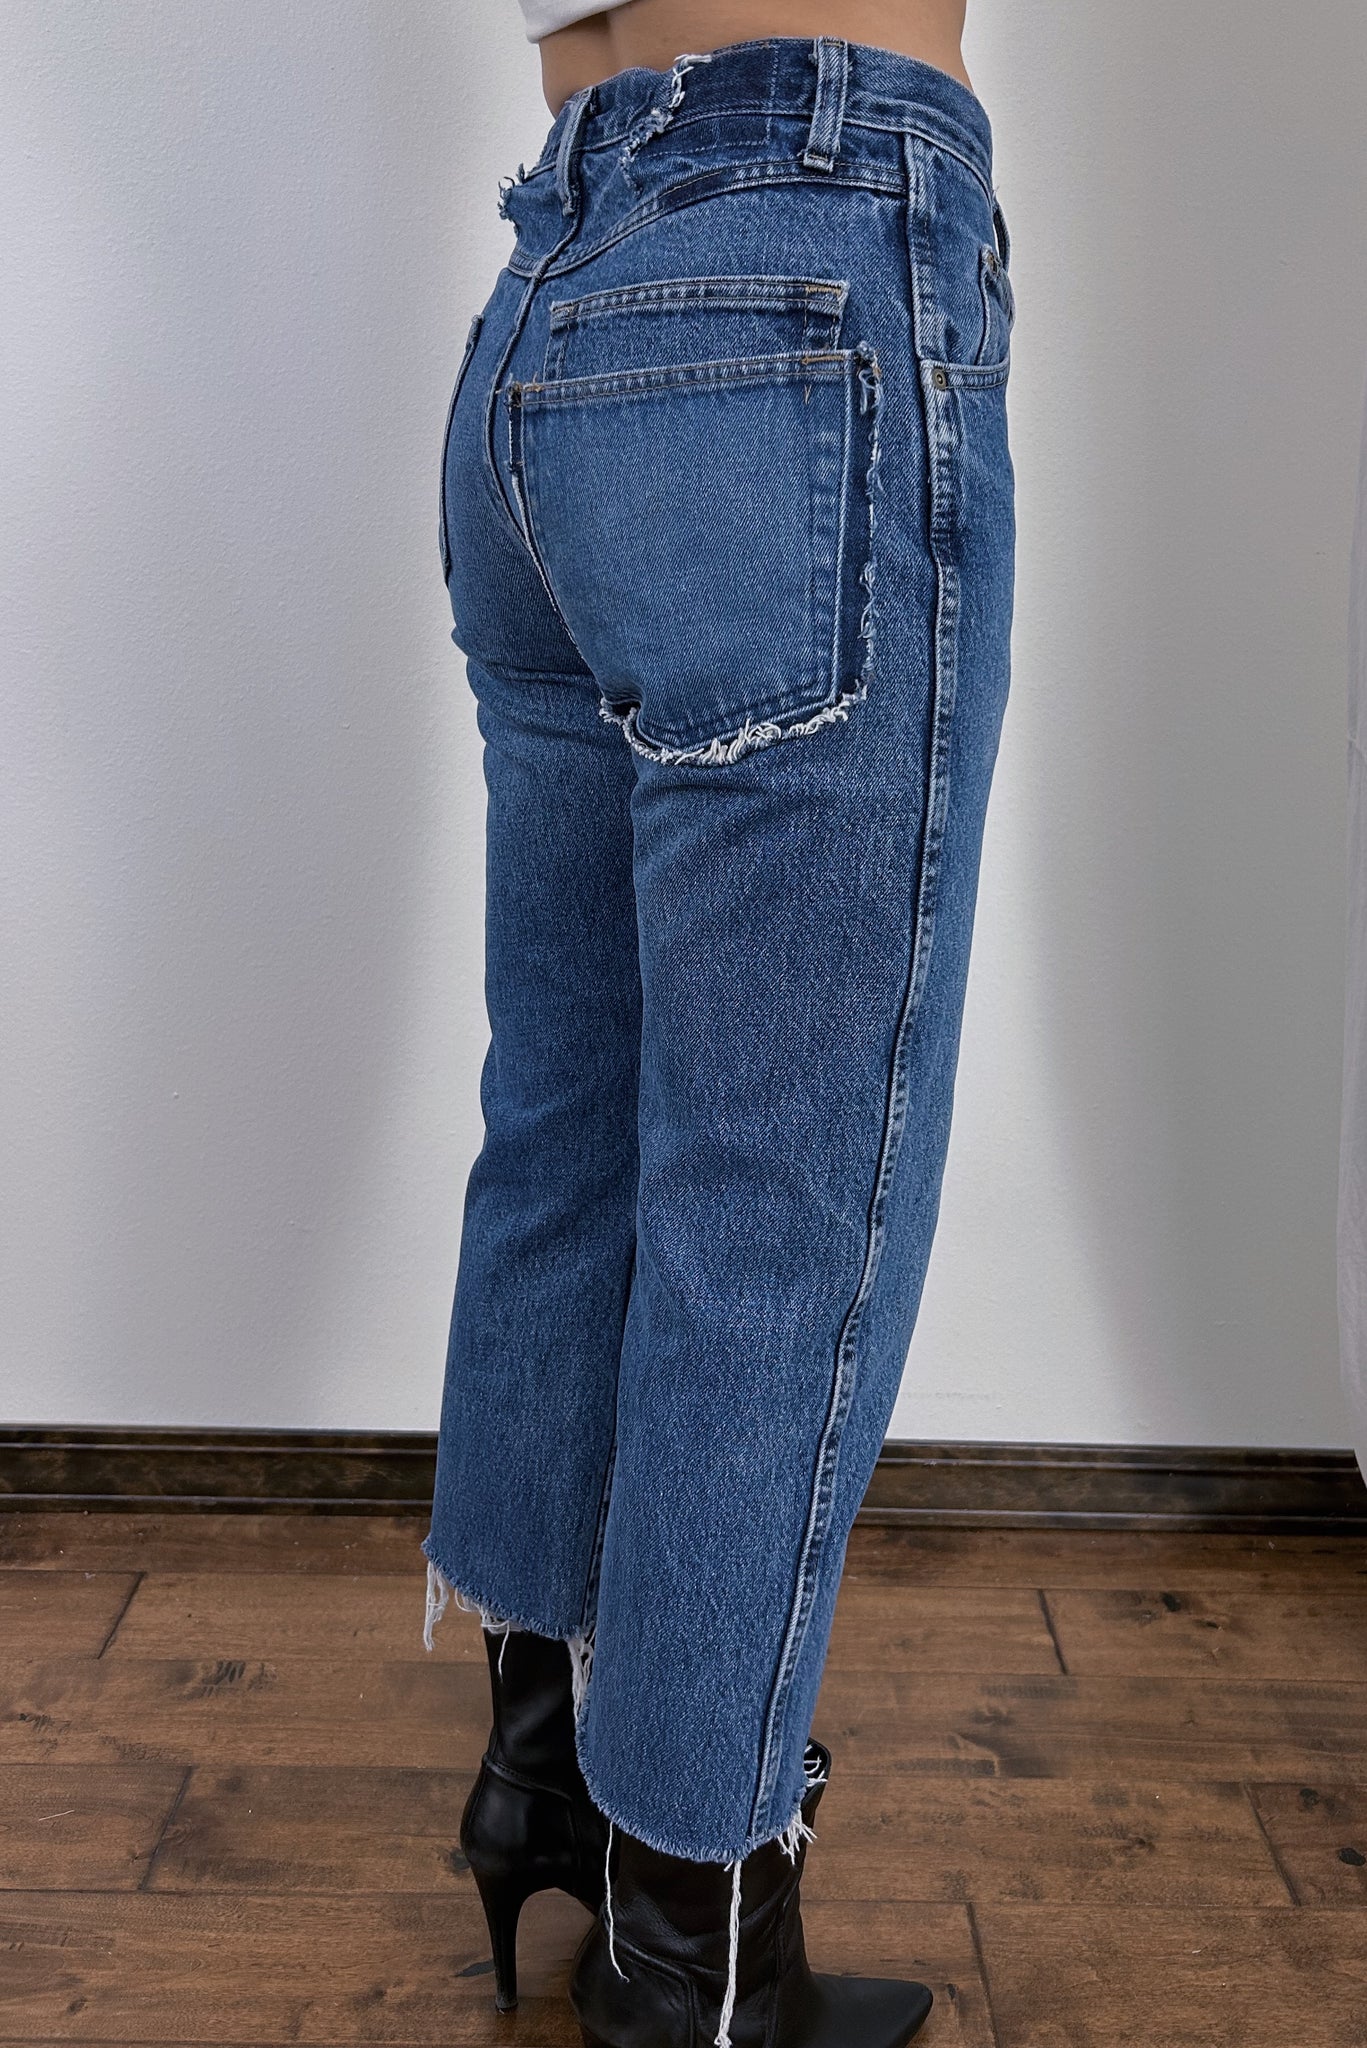 ReShaped Jeans #13